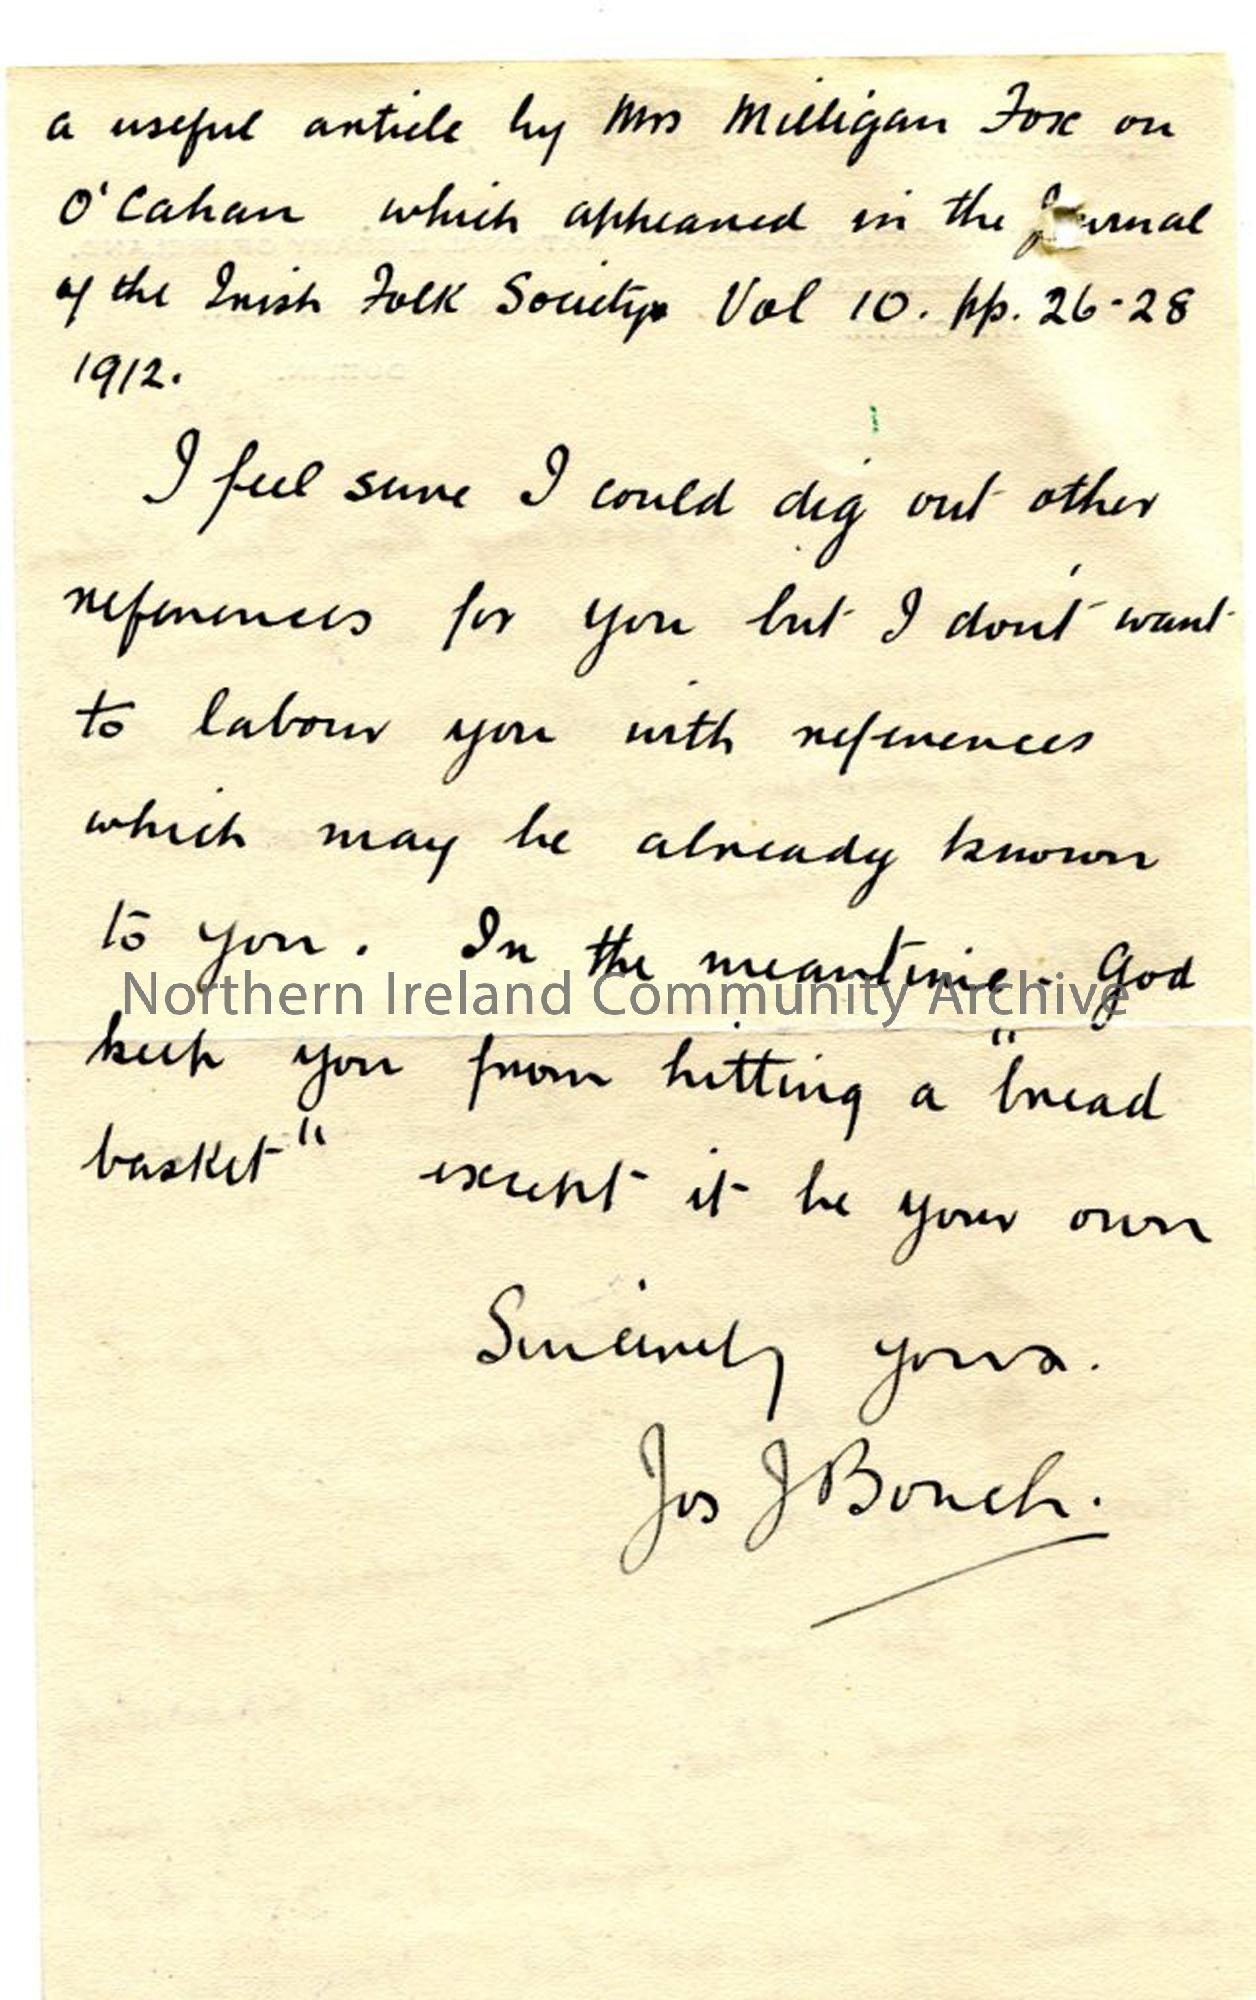 Page two: letter from JJ Bonch of National Library of Ireland, dated 5.2.1941